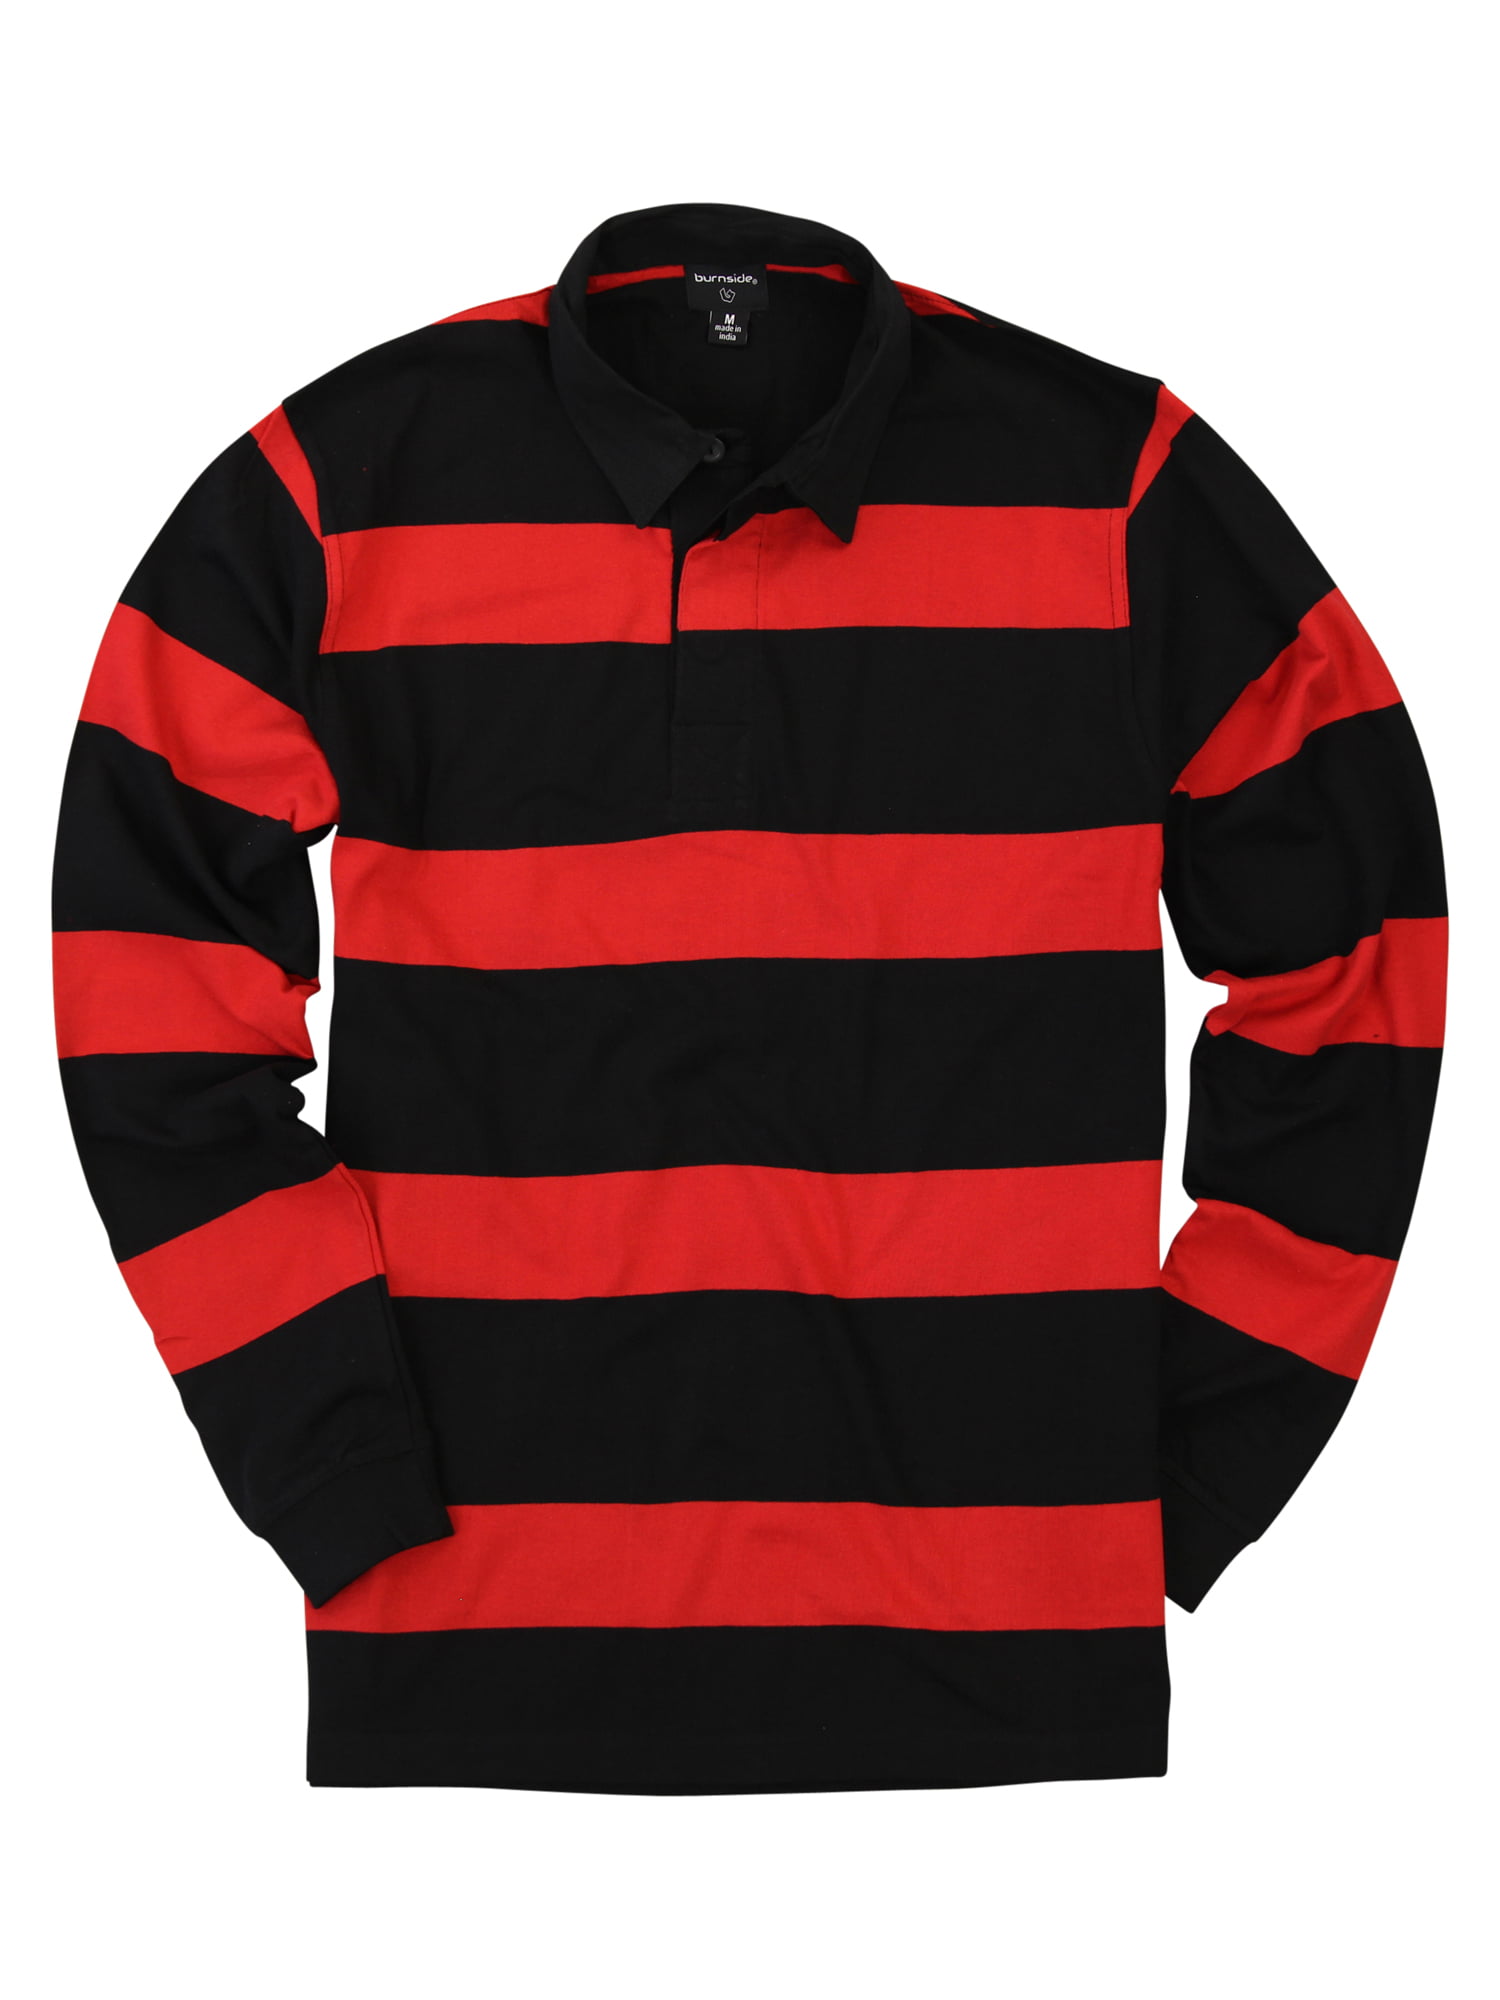 Men's Long Sleeve Big Striped Rugby Polo (Red / Black, Medium